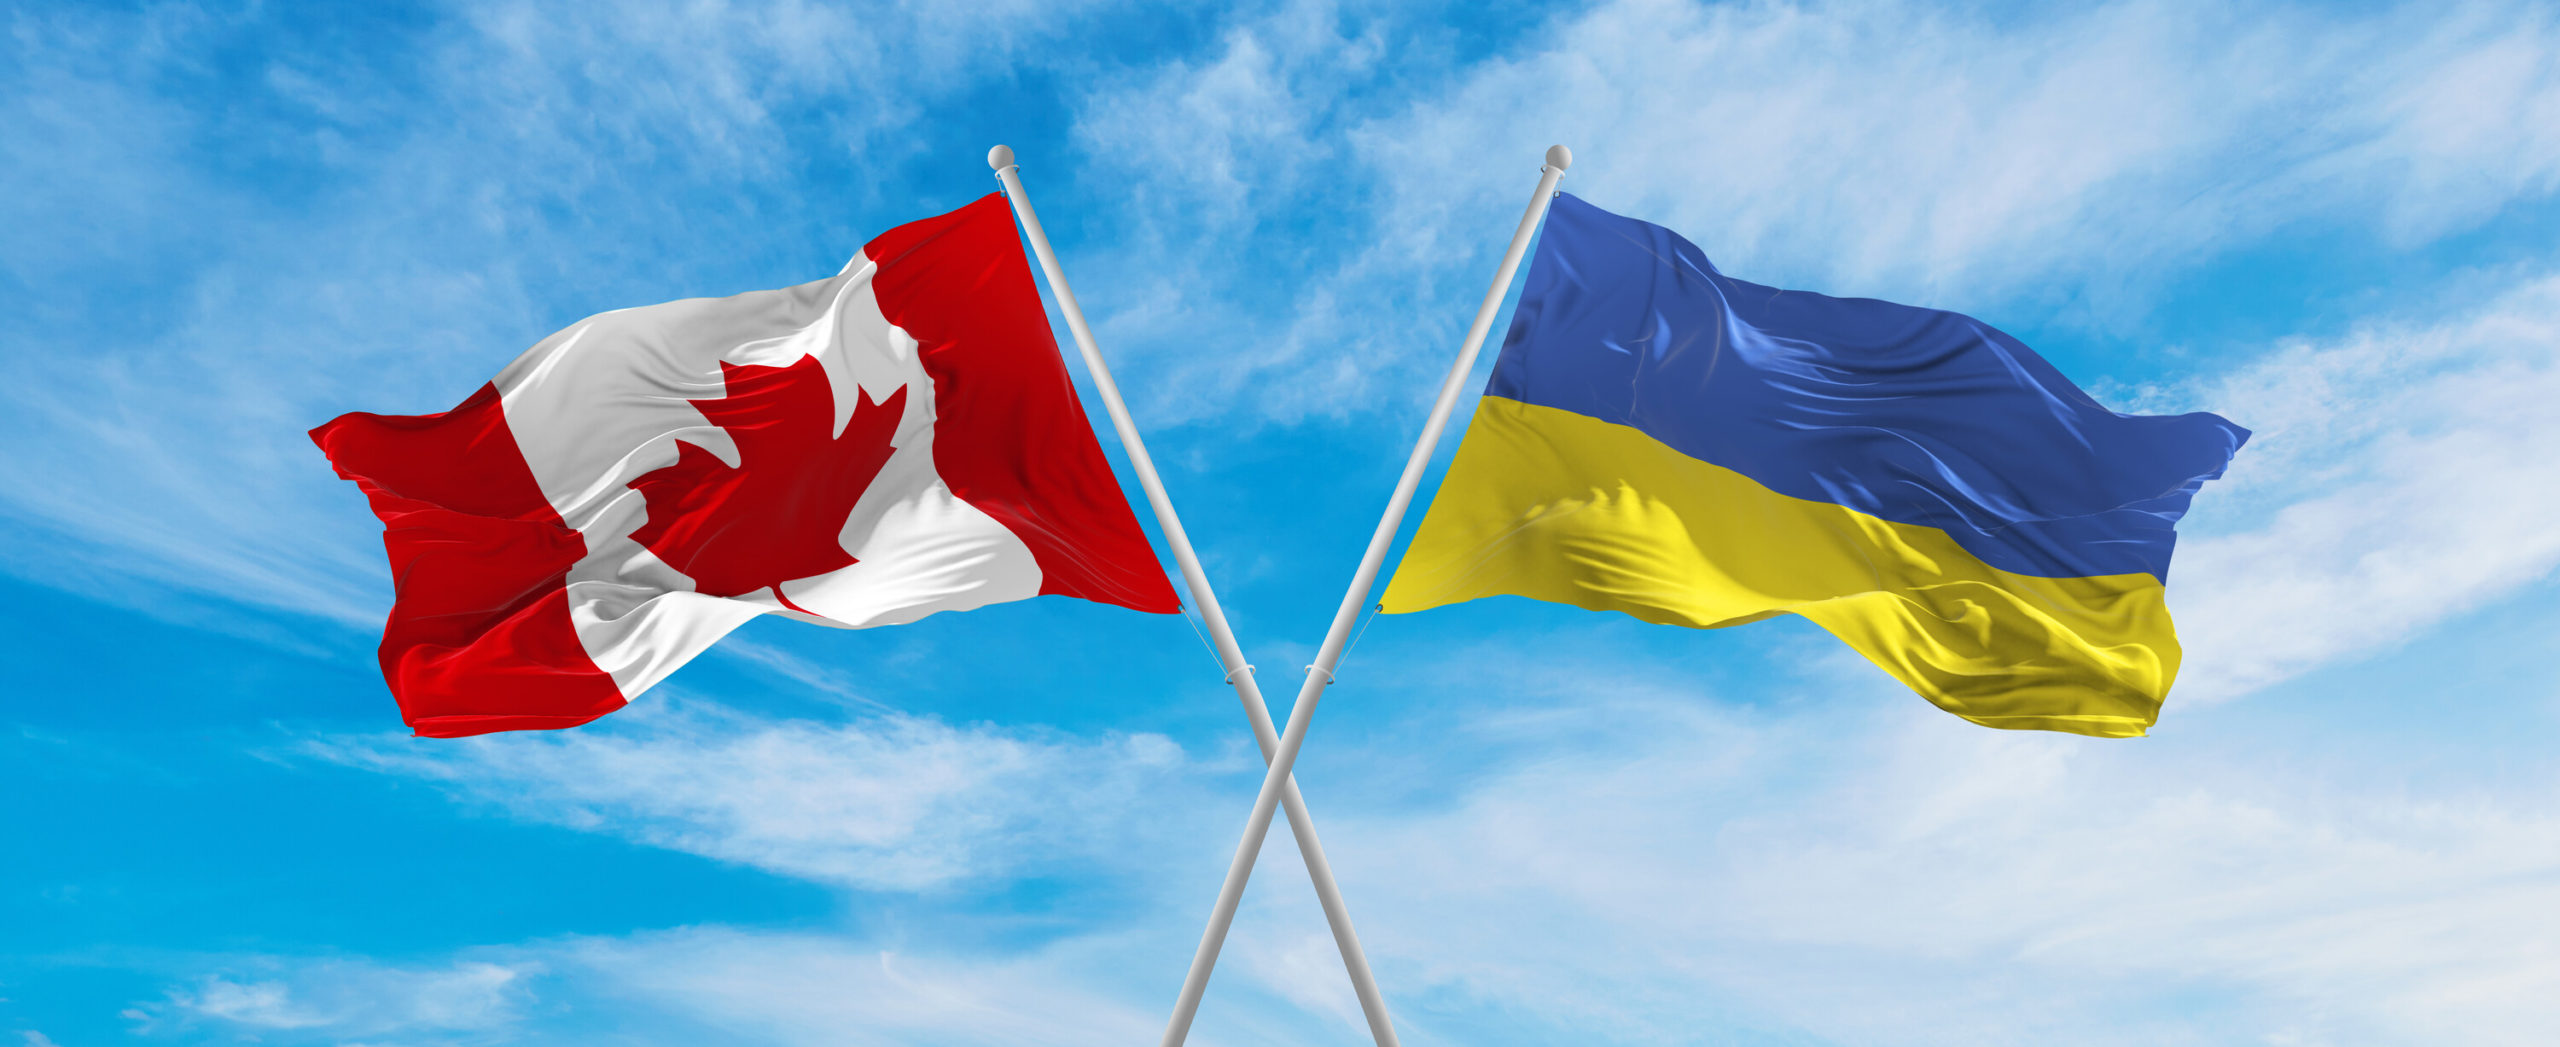 canadian industry for ukraine donation portal created scaled